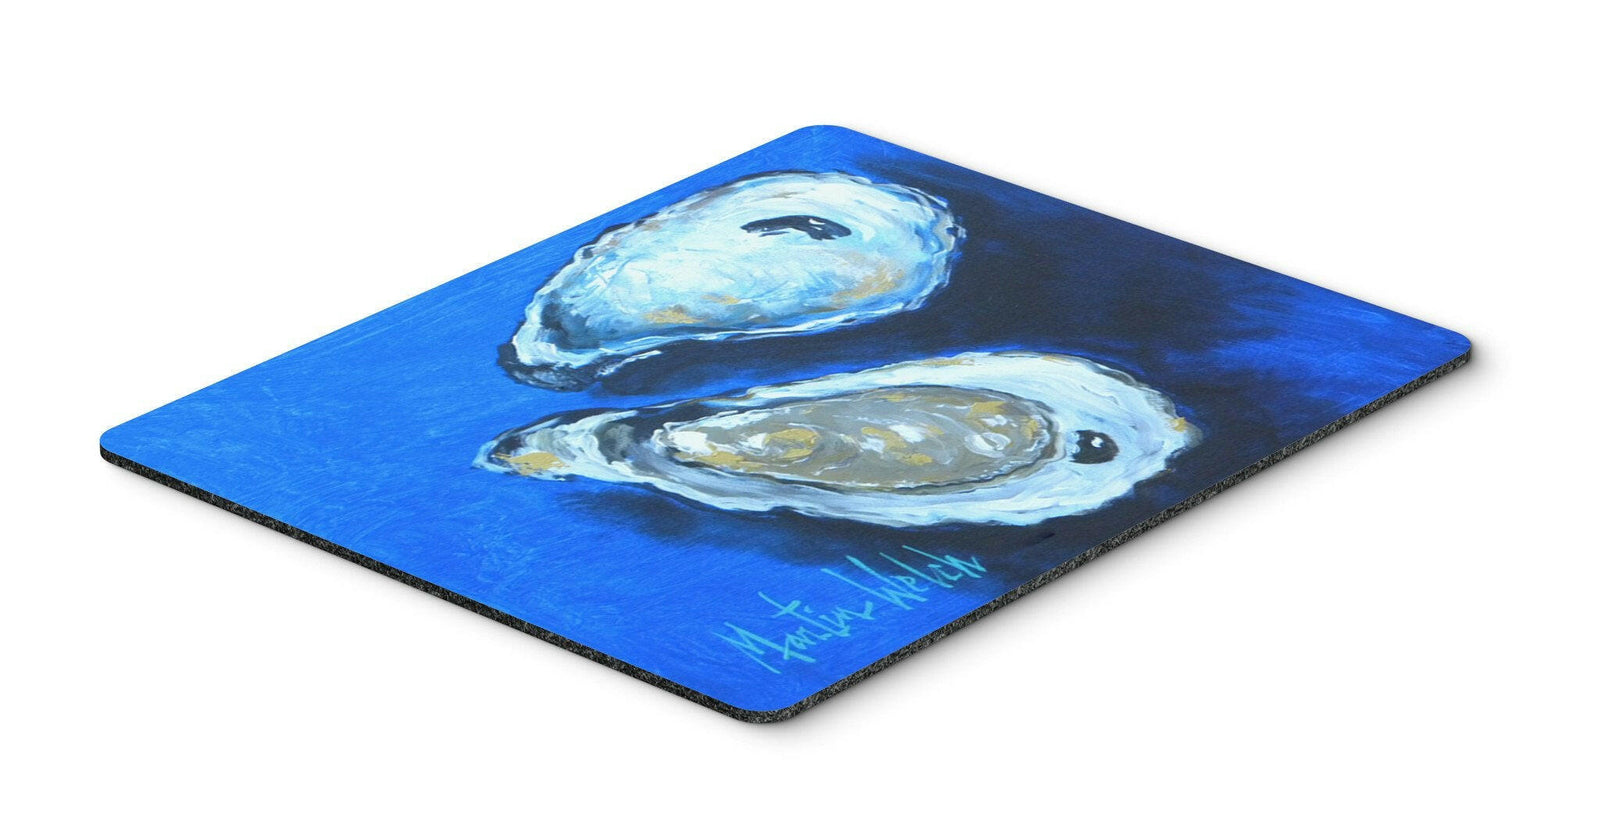 Oysters Seafood Four Mouse Pad, Hot Pad or Trivet by Caroline's Treasures